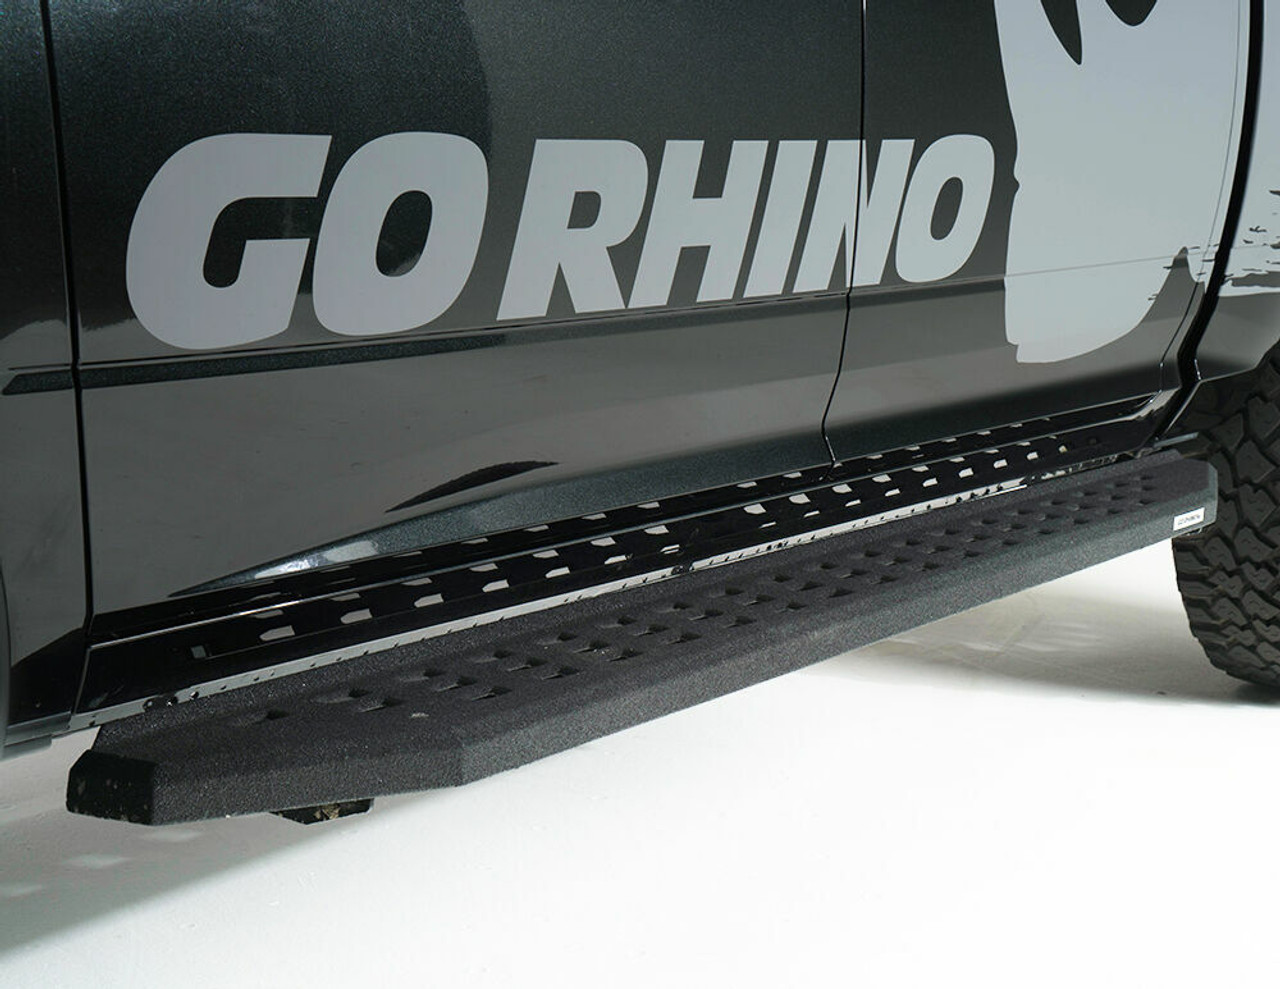 Go Rhino 69415587T Ford, F-150 Raptor, 2017 - 2021, RB20 Running boards - Complete Kit: RB20 Running boards + Brackets, Galvanized Steel, Protective Bedliner coating, 69400087T RB20 + 6941555 RB Brackets